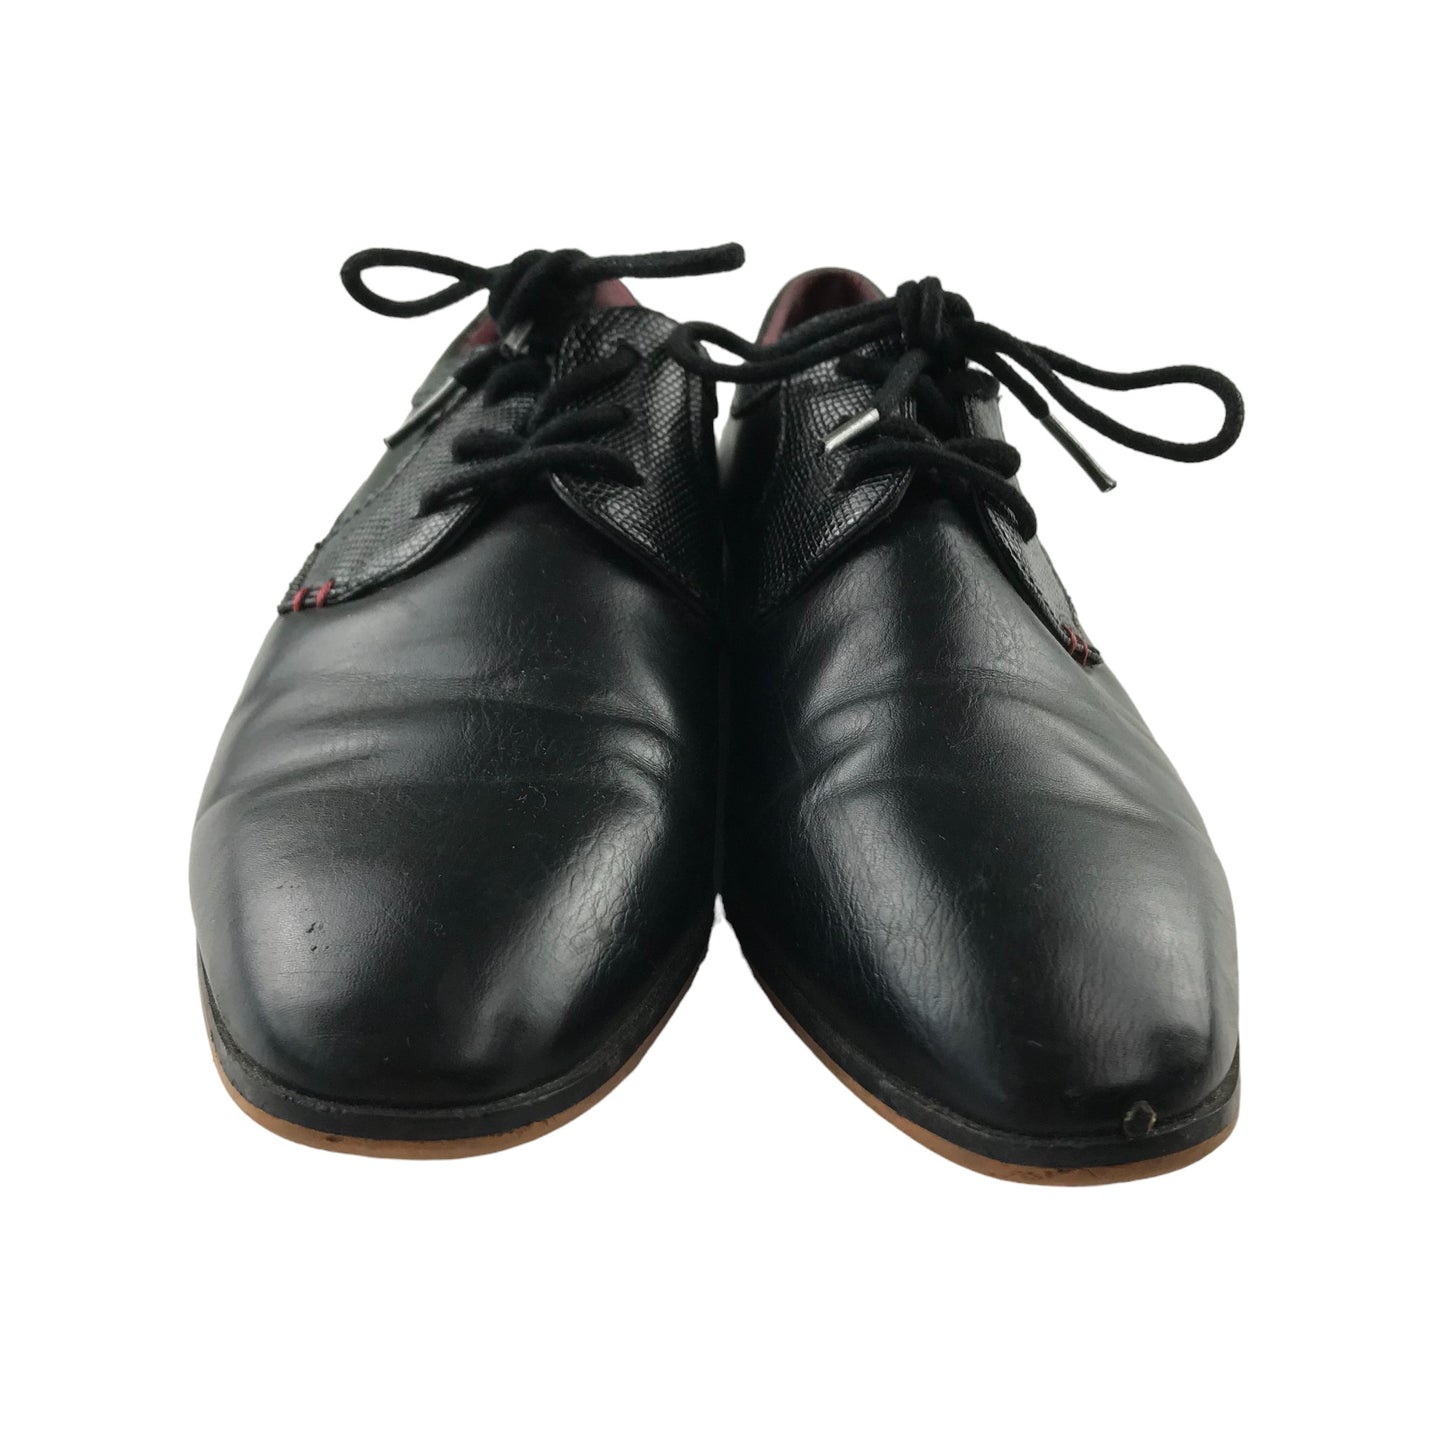 River Island Oxford Shoe Size 2 Black Leather Style with Laces